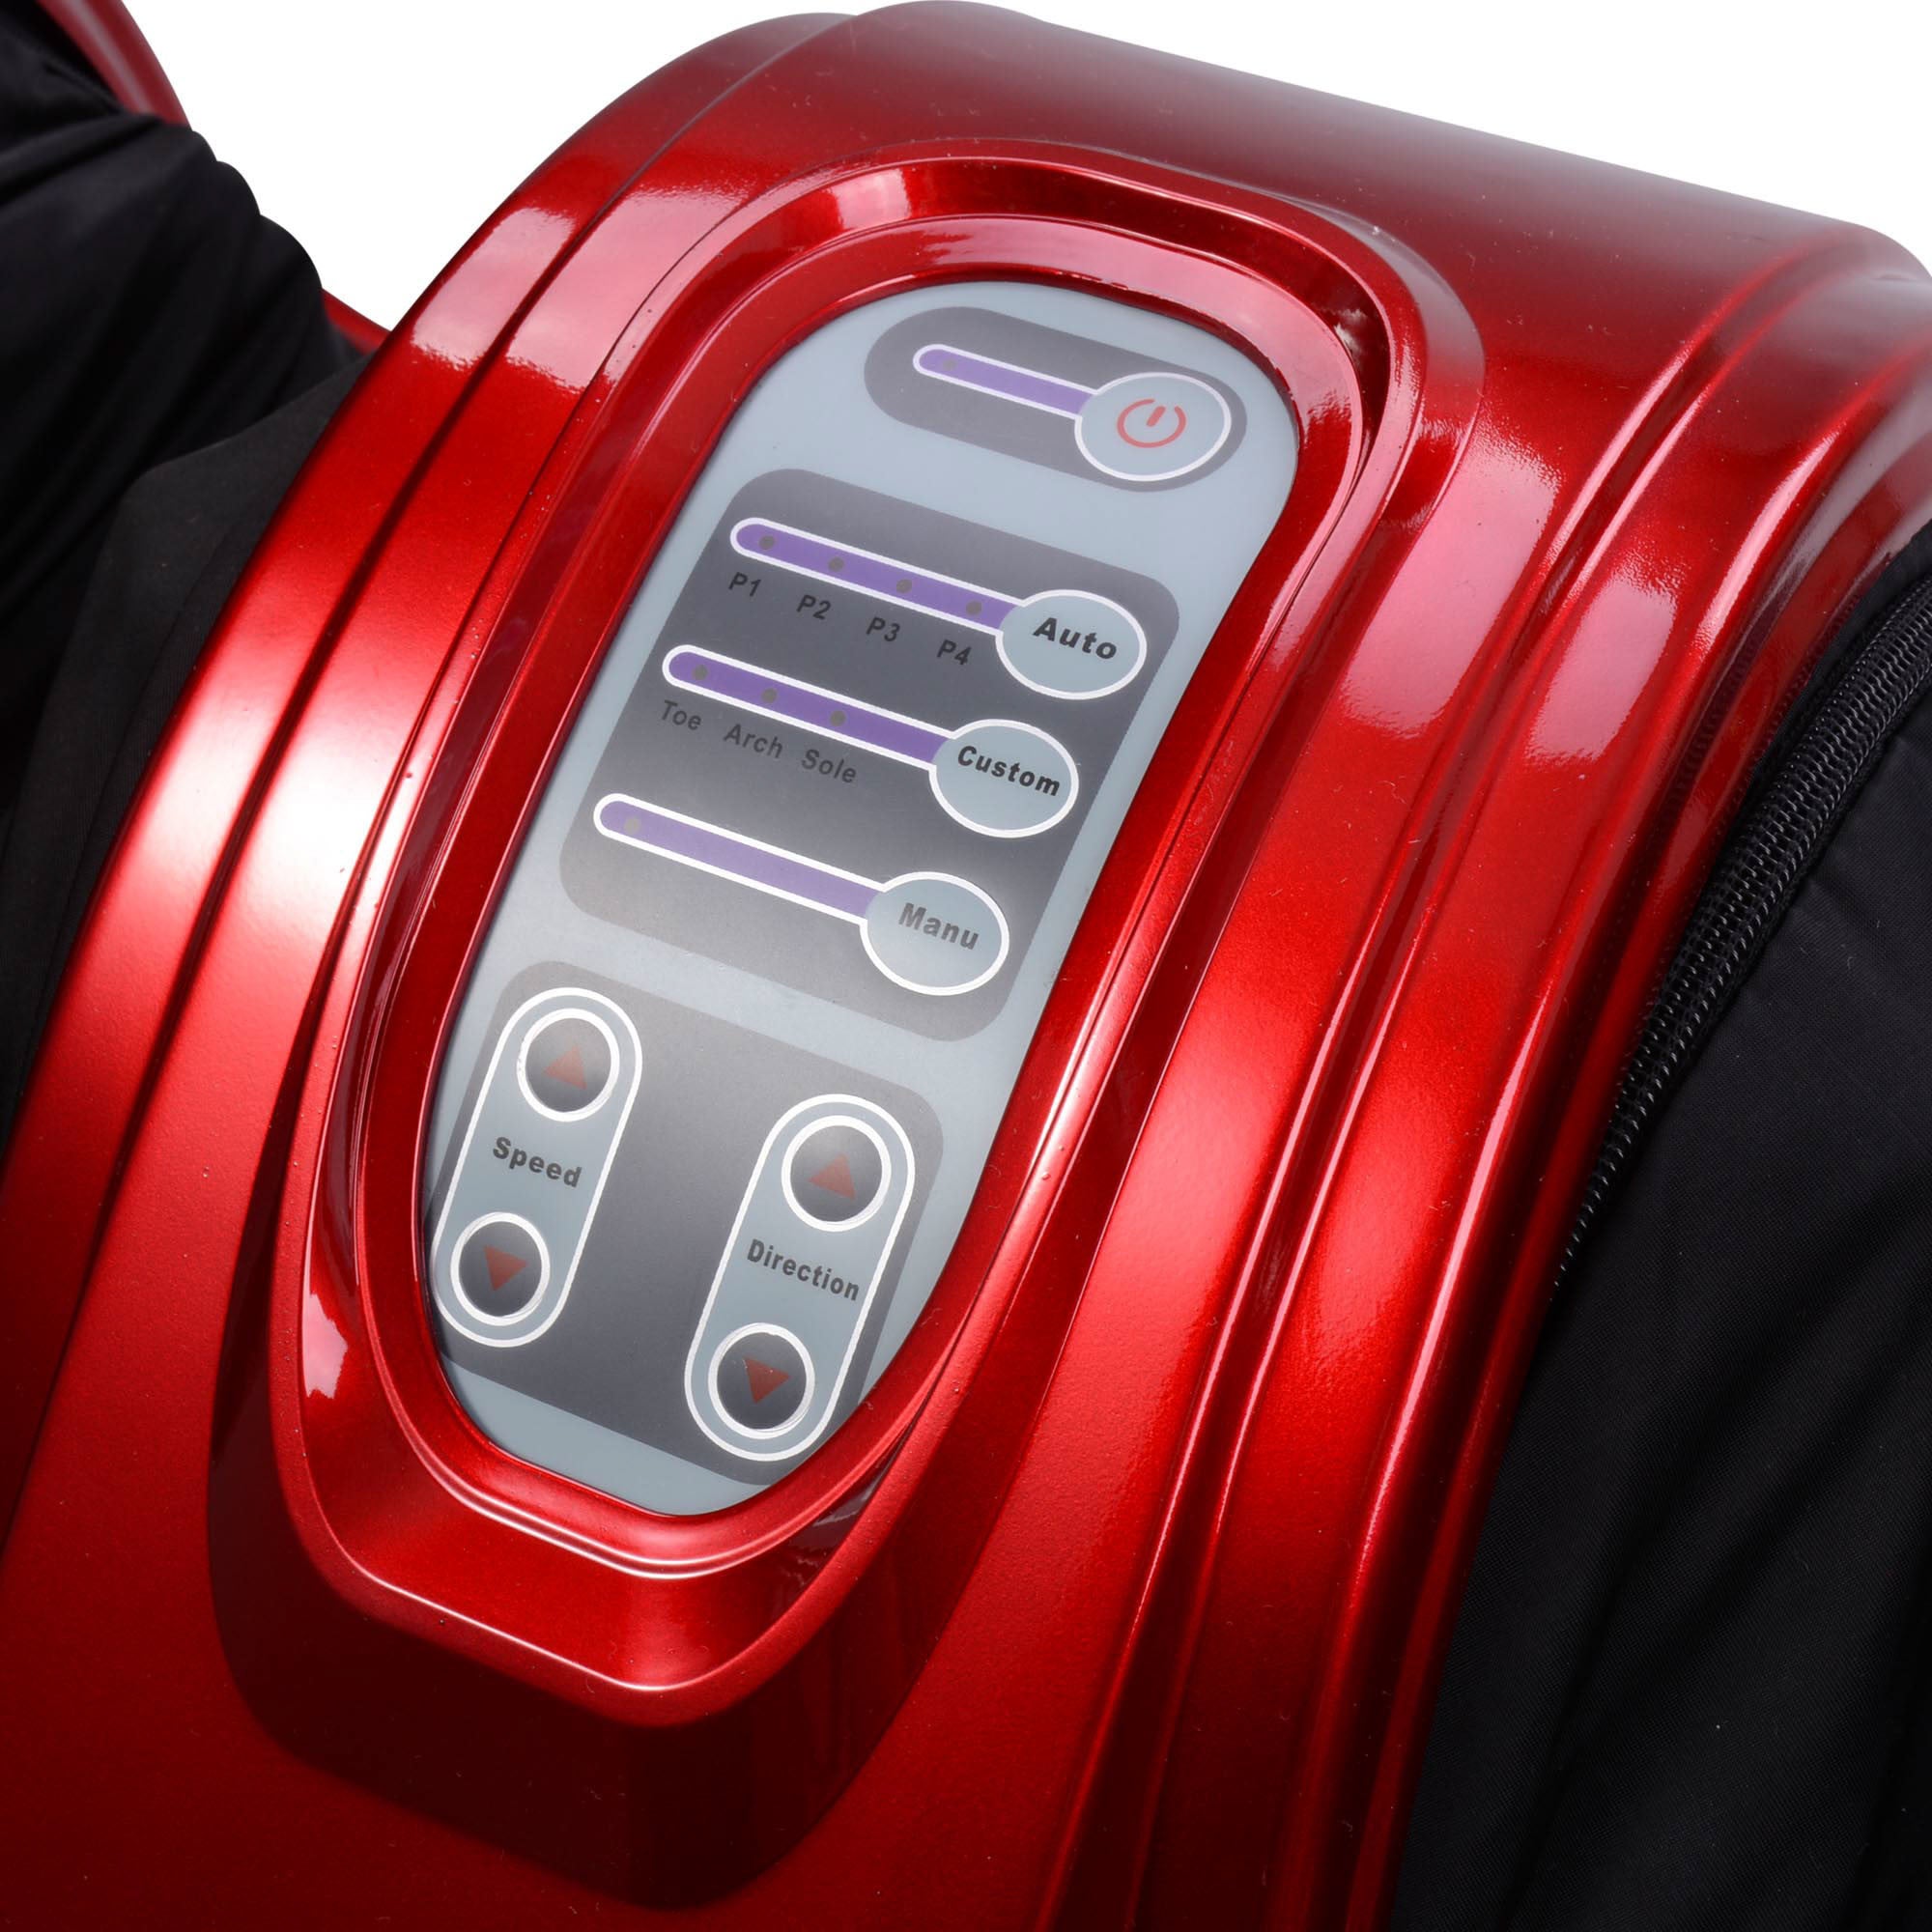 Image of the control buttons on the Foot Massager